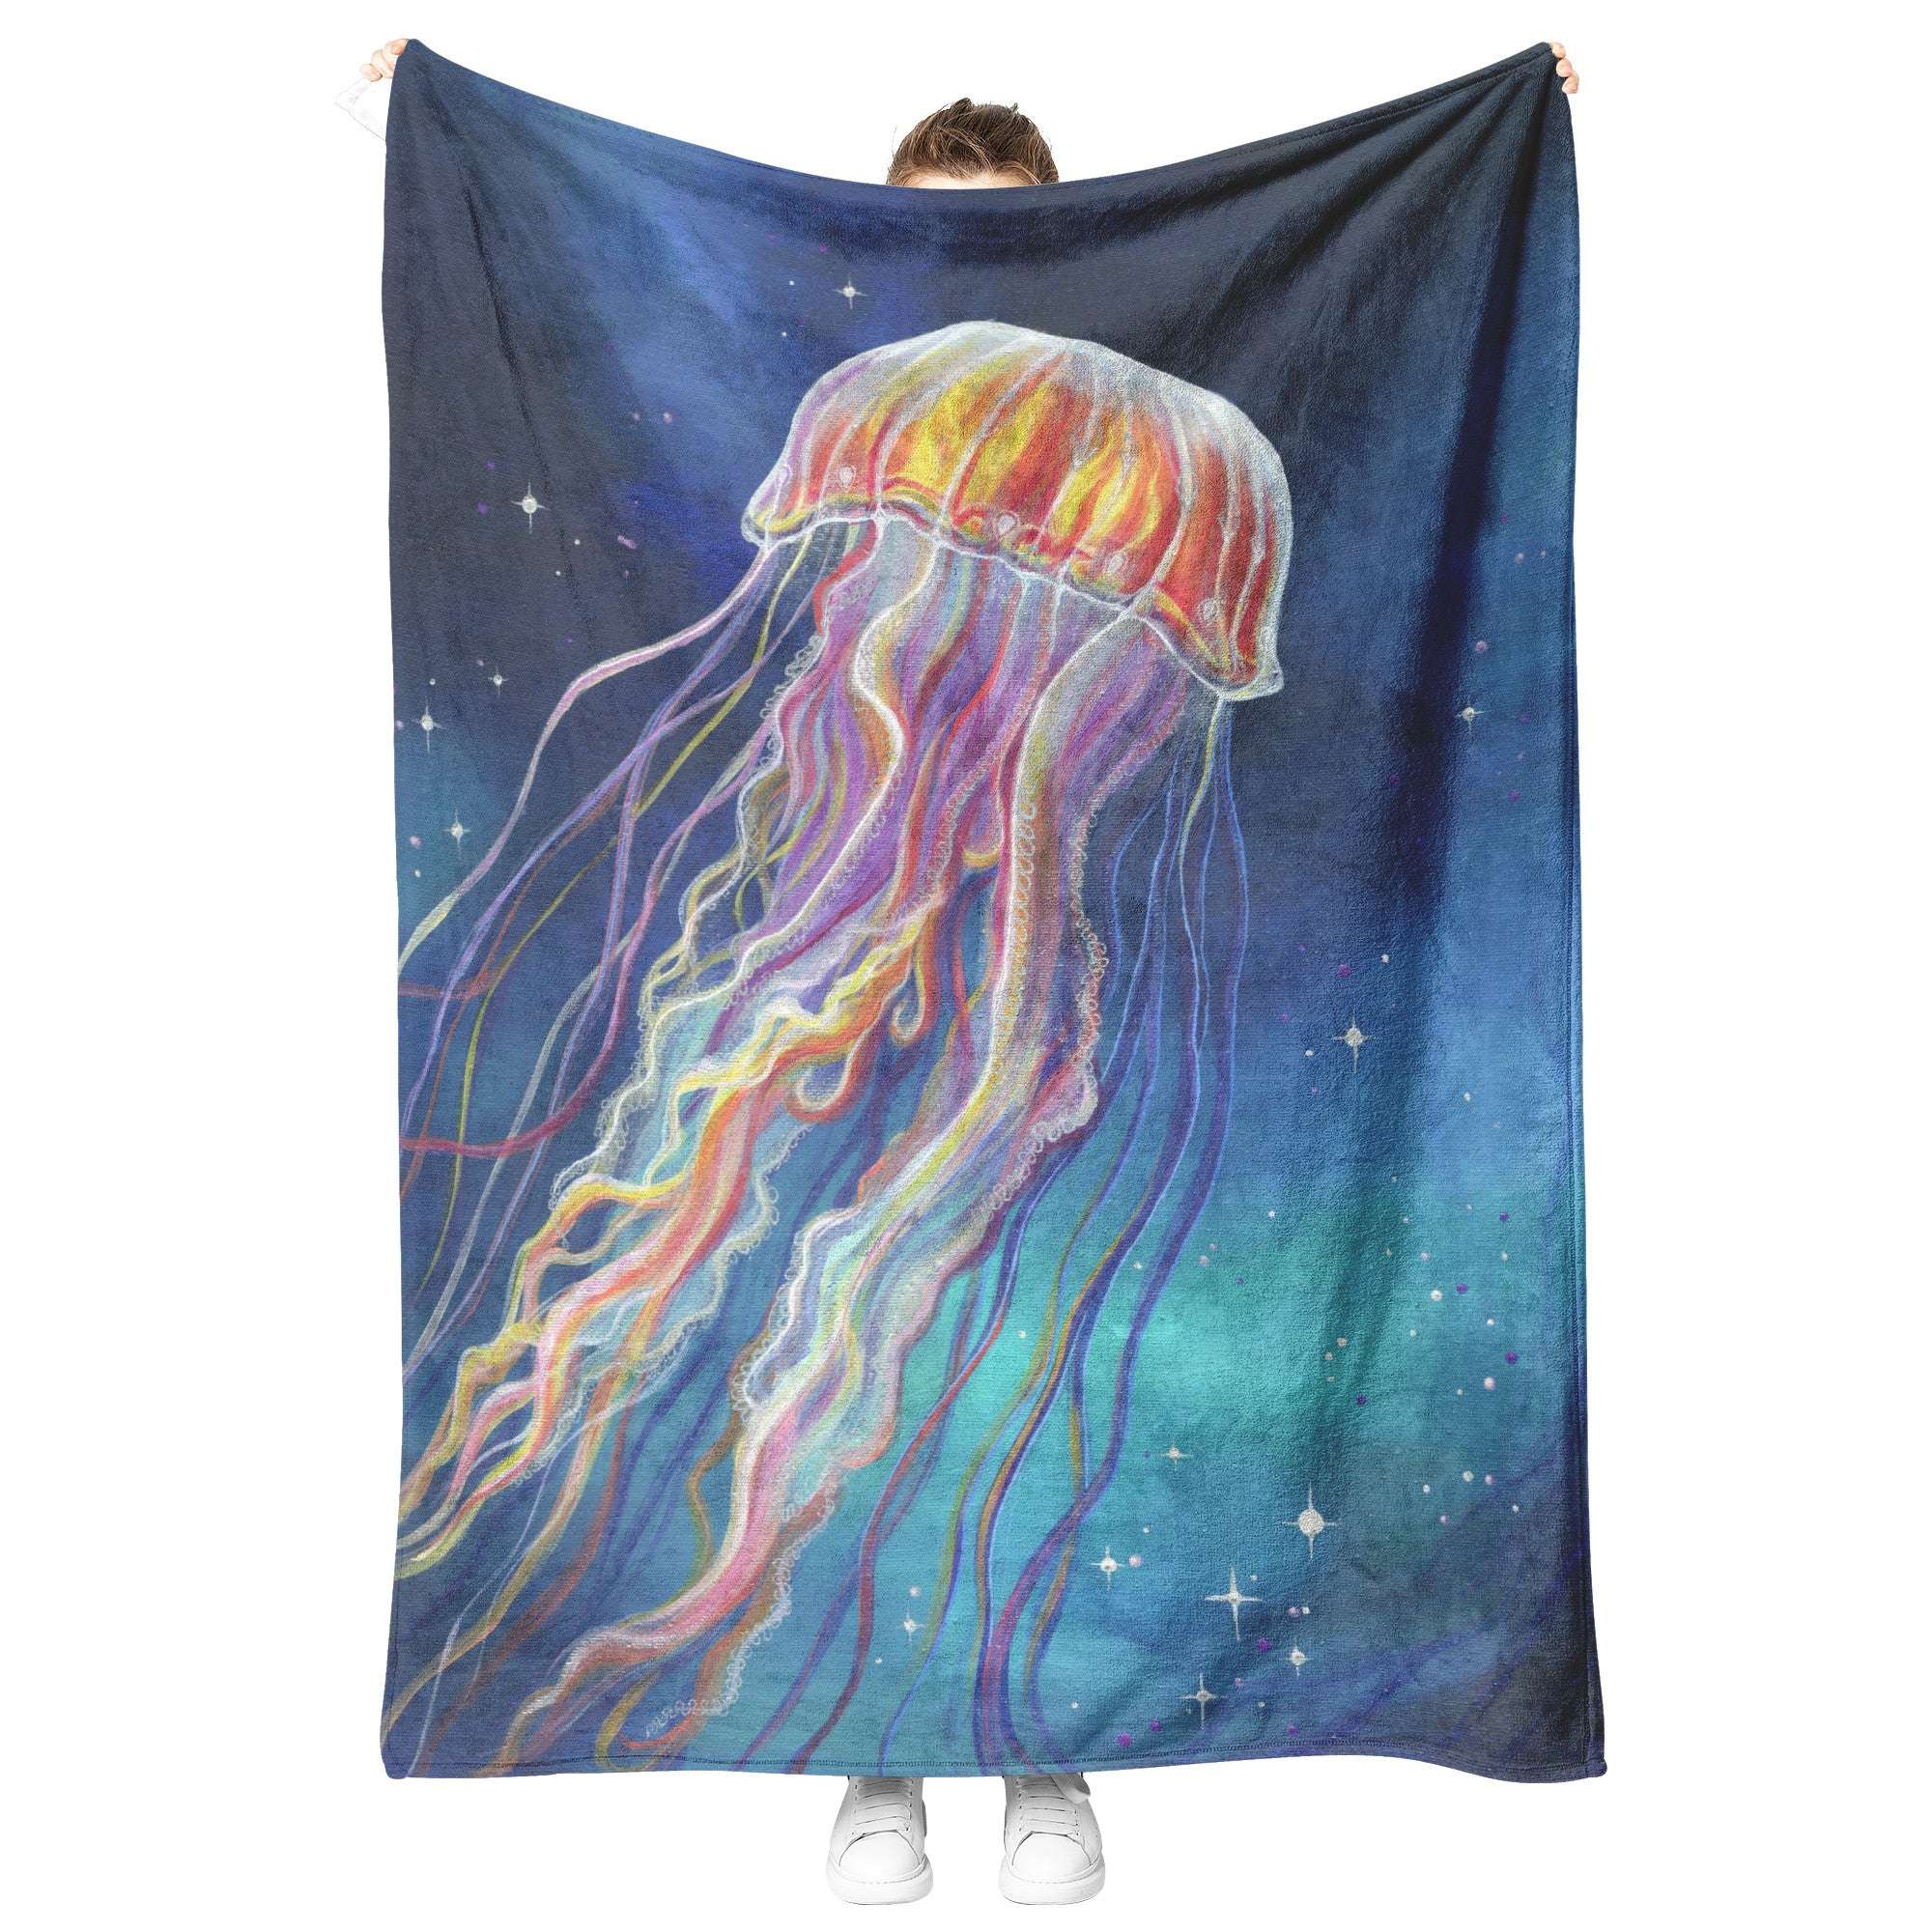 Person holding up a Jellyfish Blanket with a vibrant jellyfish design against a cosmic, starry background.